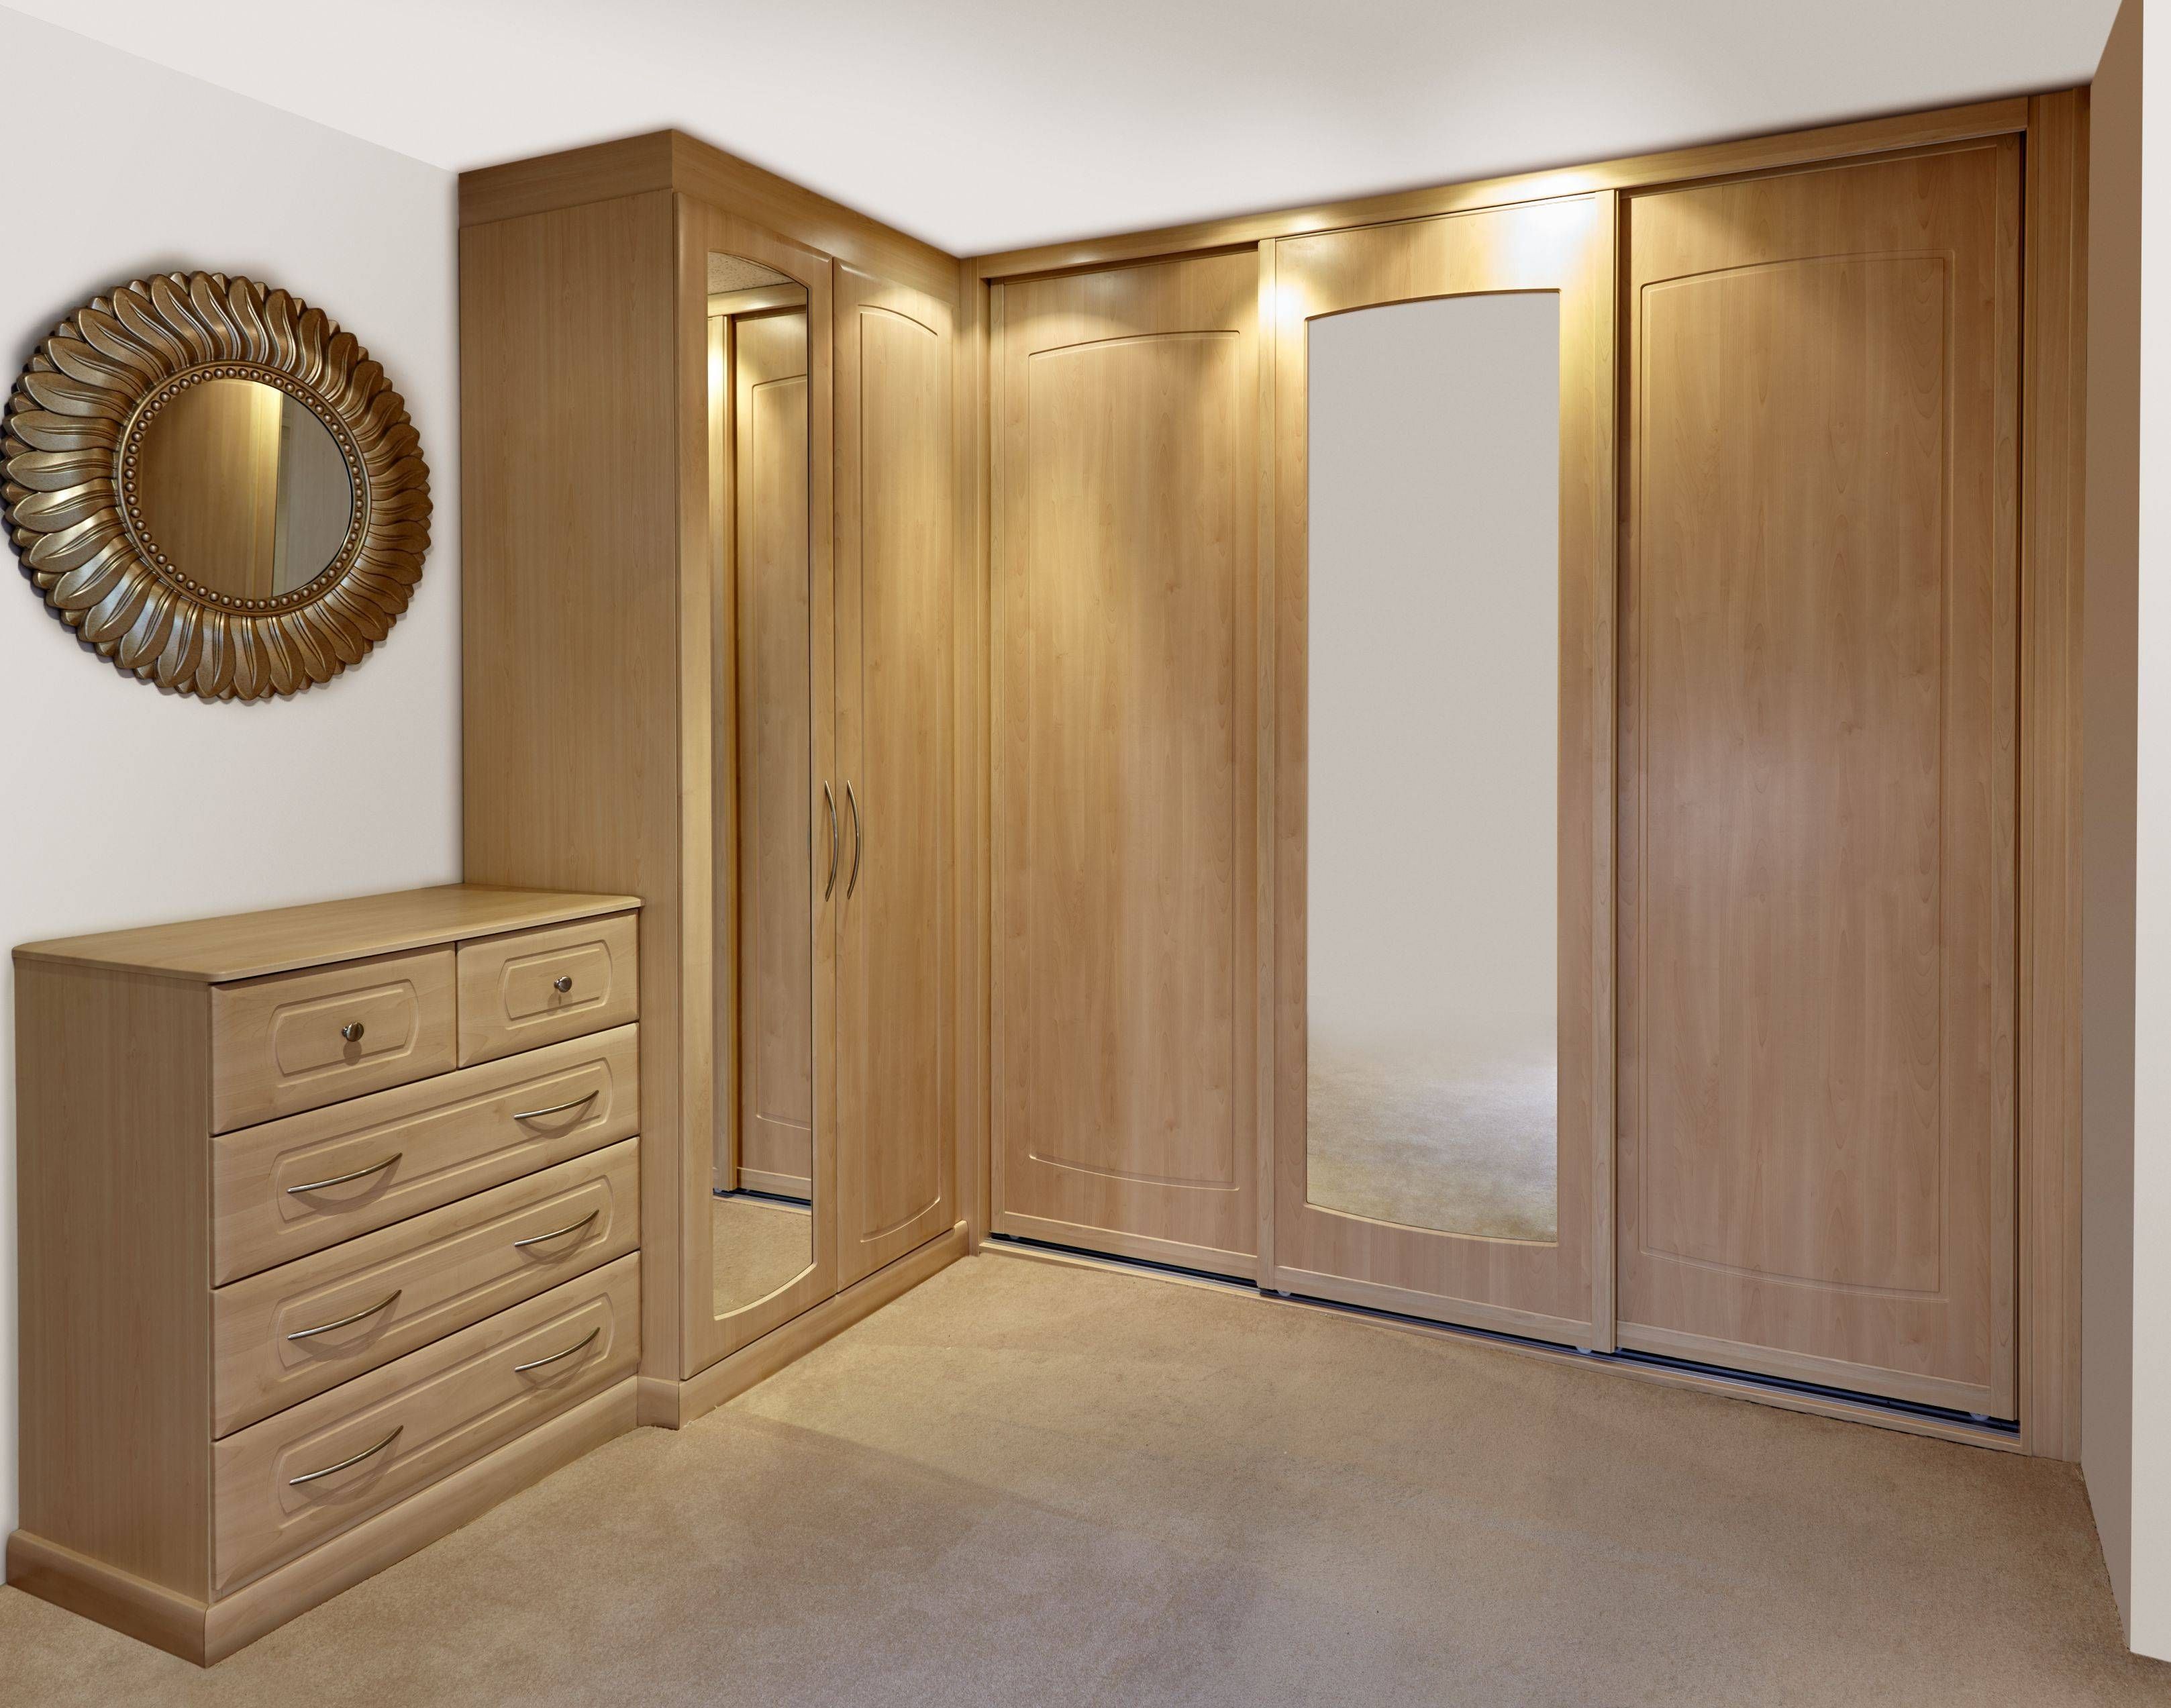 Wardrobe : Fitted Wardrobes Around Bed Uk Bedroom Fitted Wardrobe Regarding Solid Wood Fitted Wardrobes (View 8 of 30)